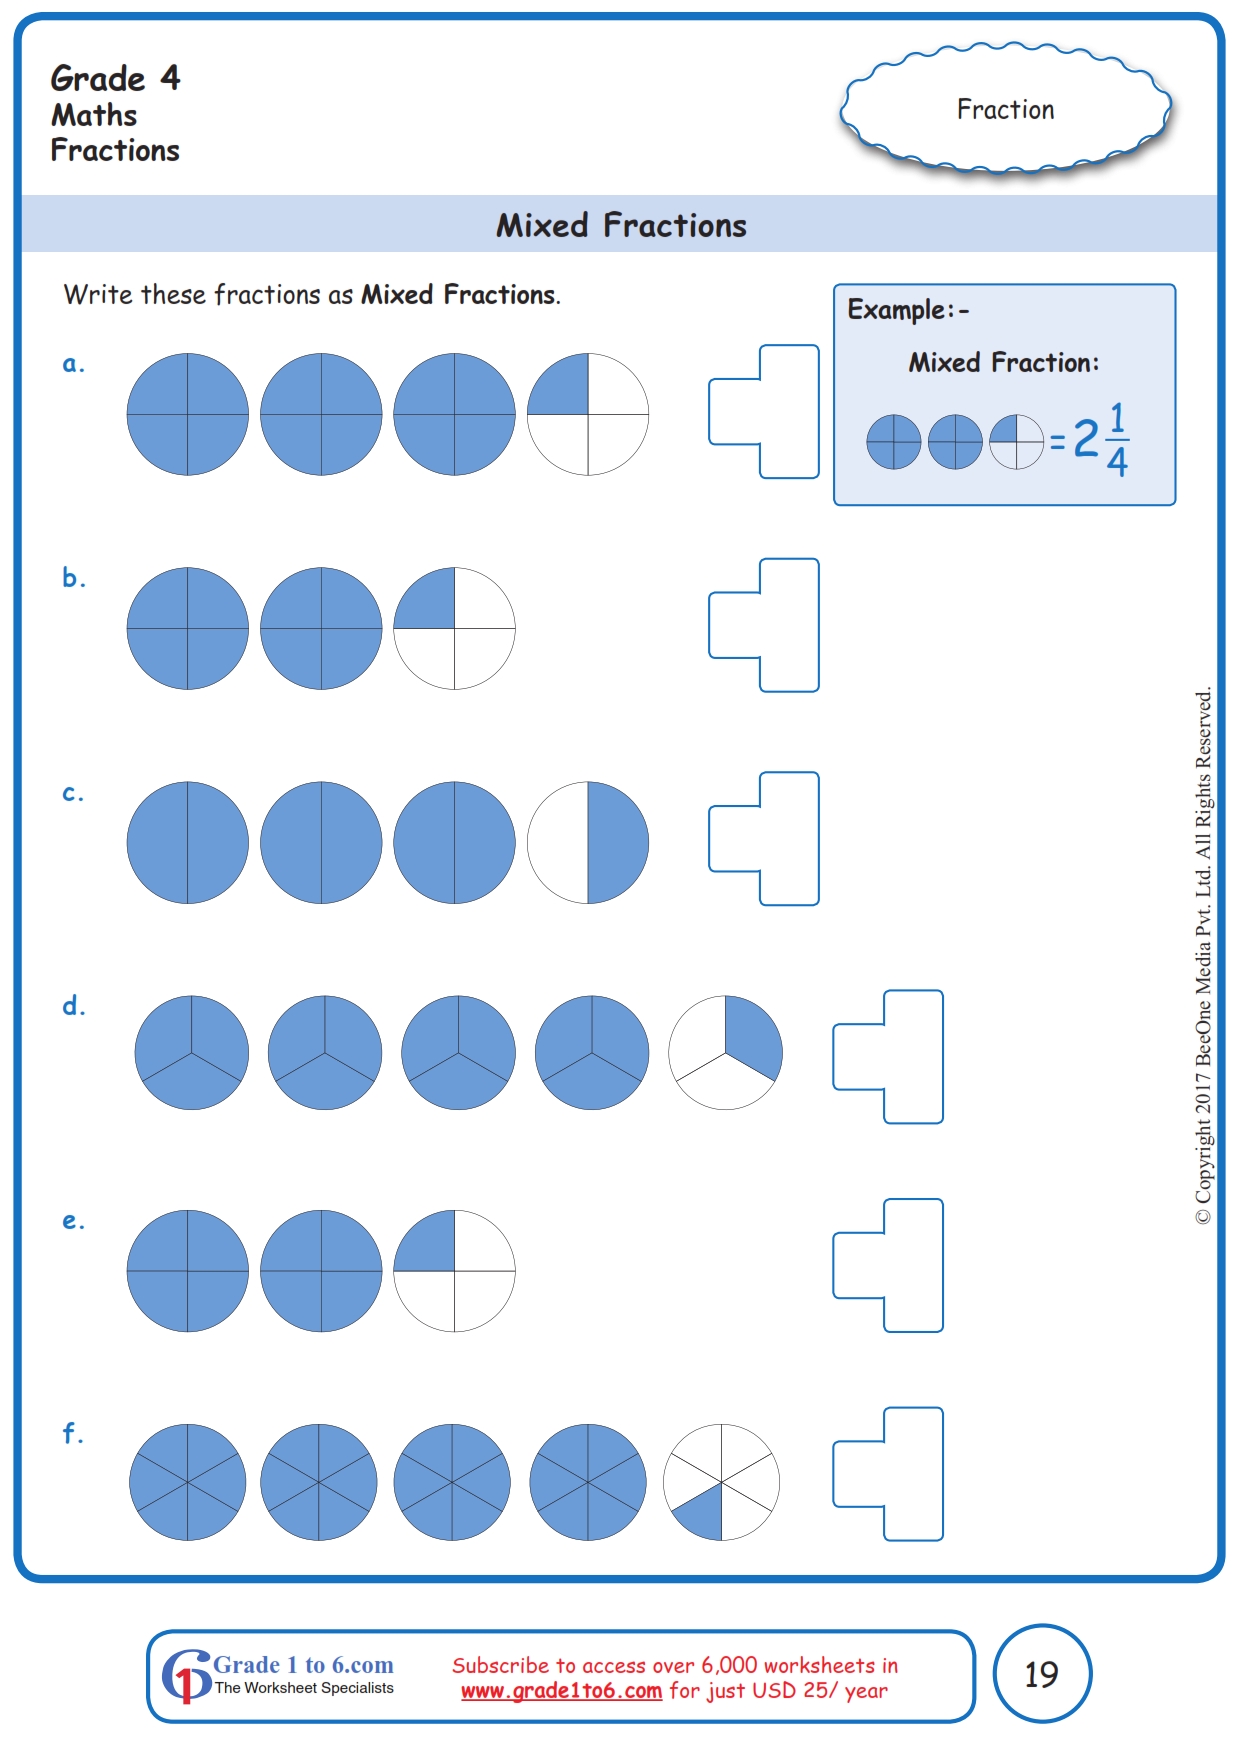 Grade 4 Mixed Fractions Worksheetswwwgrade1to6com Decompose Fractions 4th Grade Fractions 